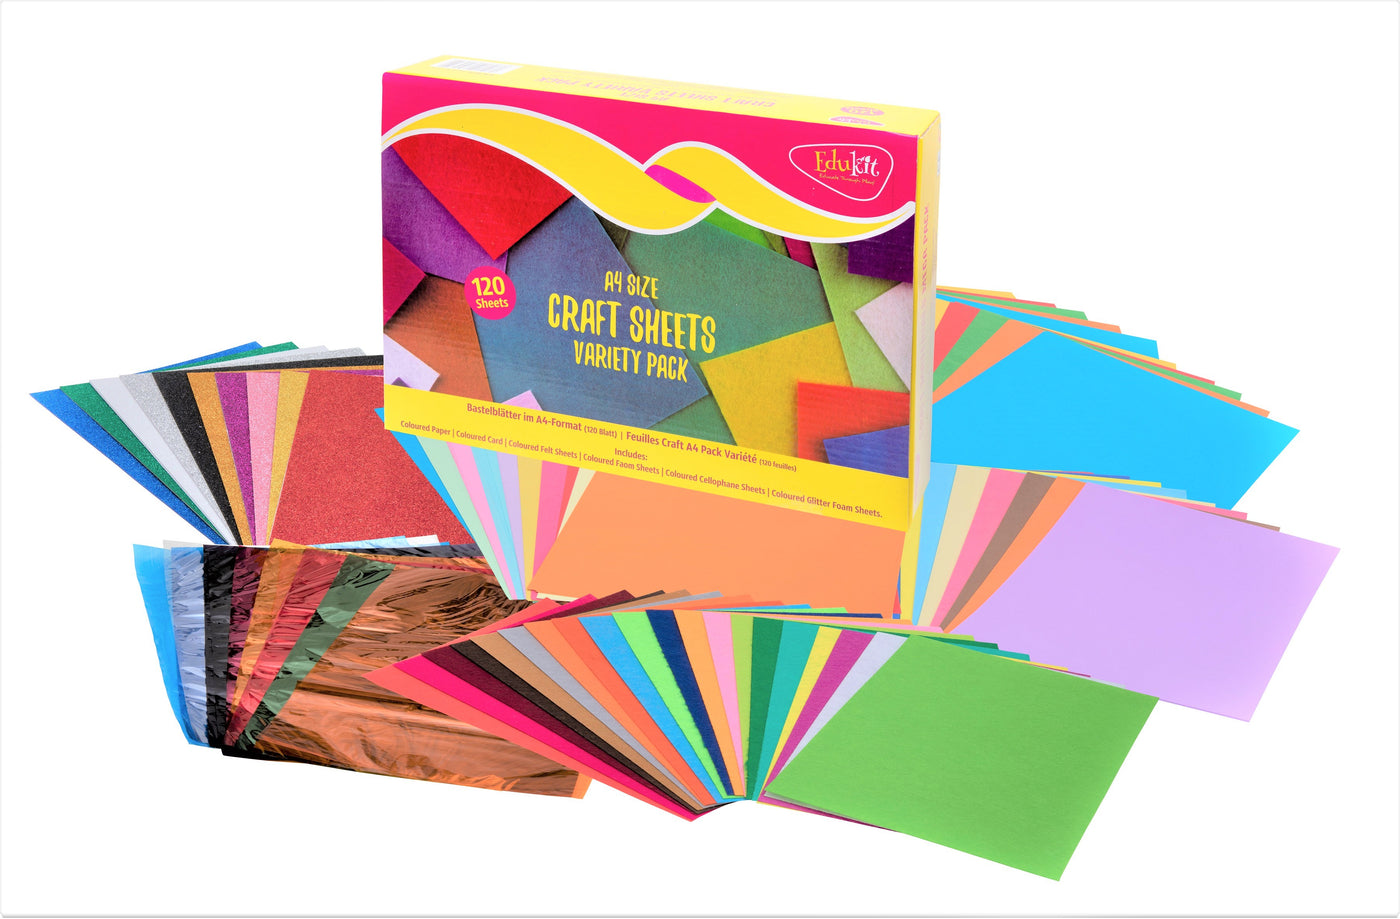 A4 Laminating sheets, Hobbies & Toys, Stationery & Craft, Other Stationery  & Craft on Carousell